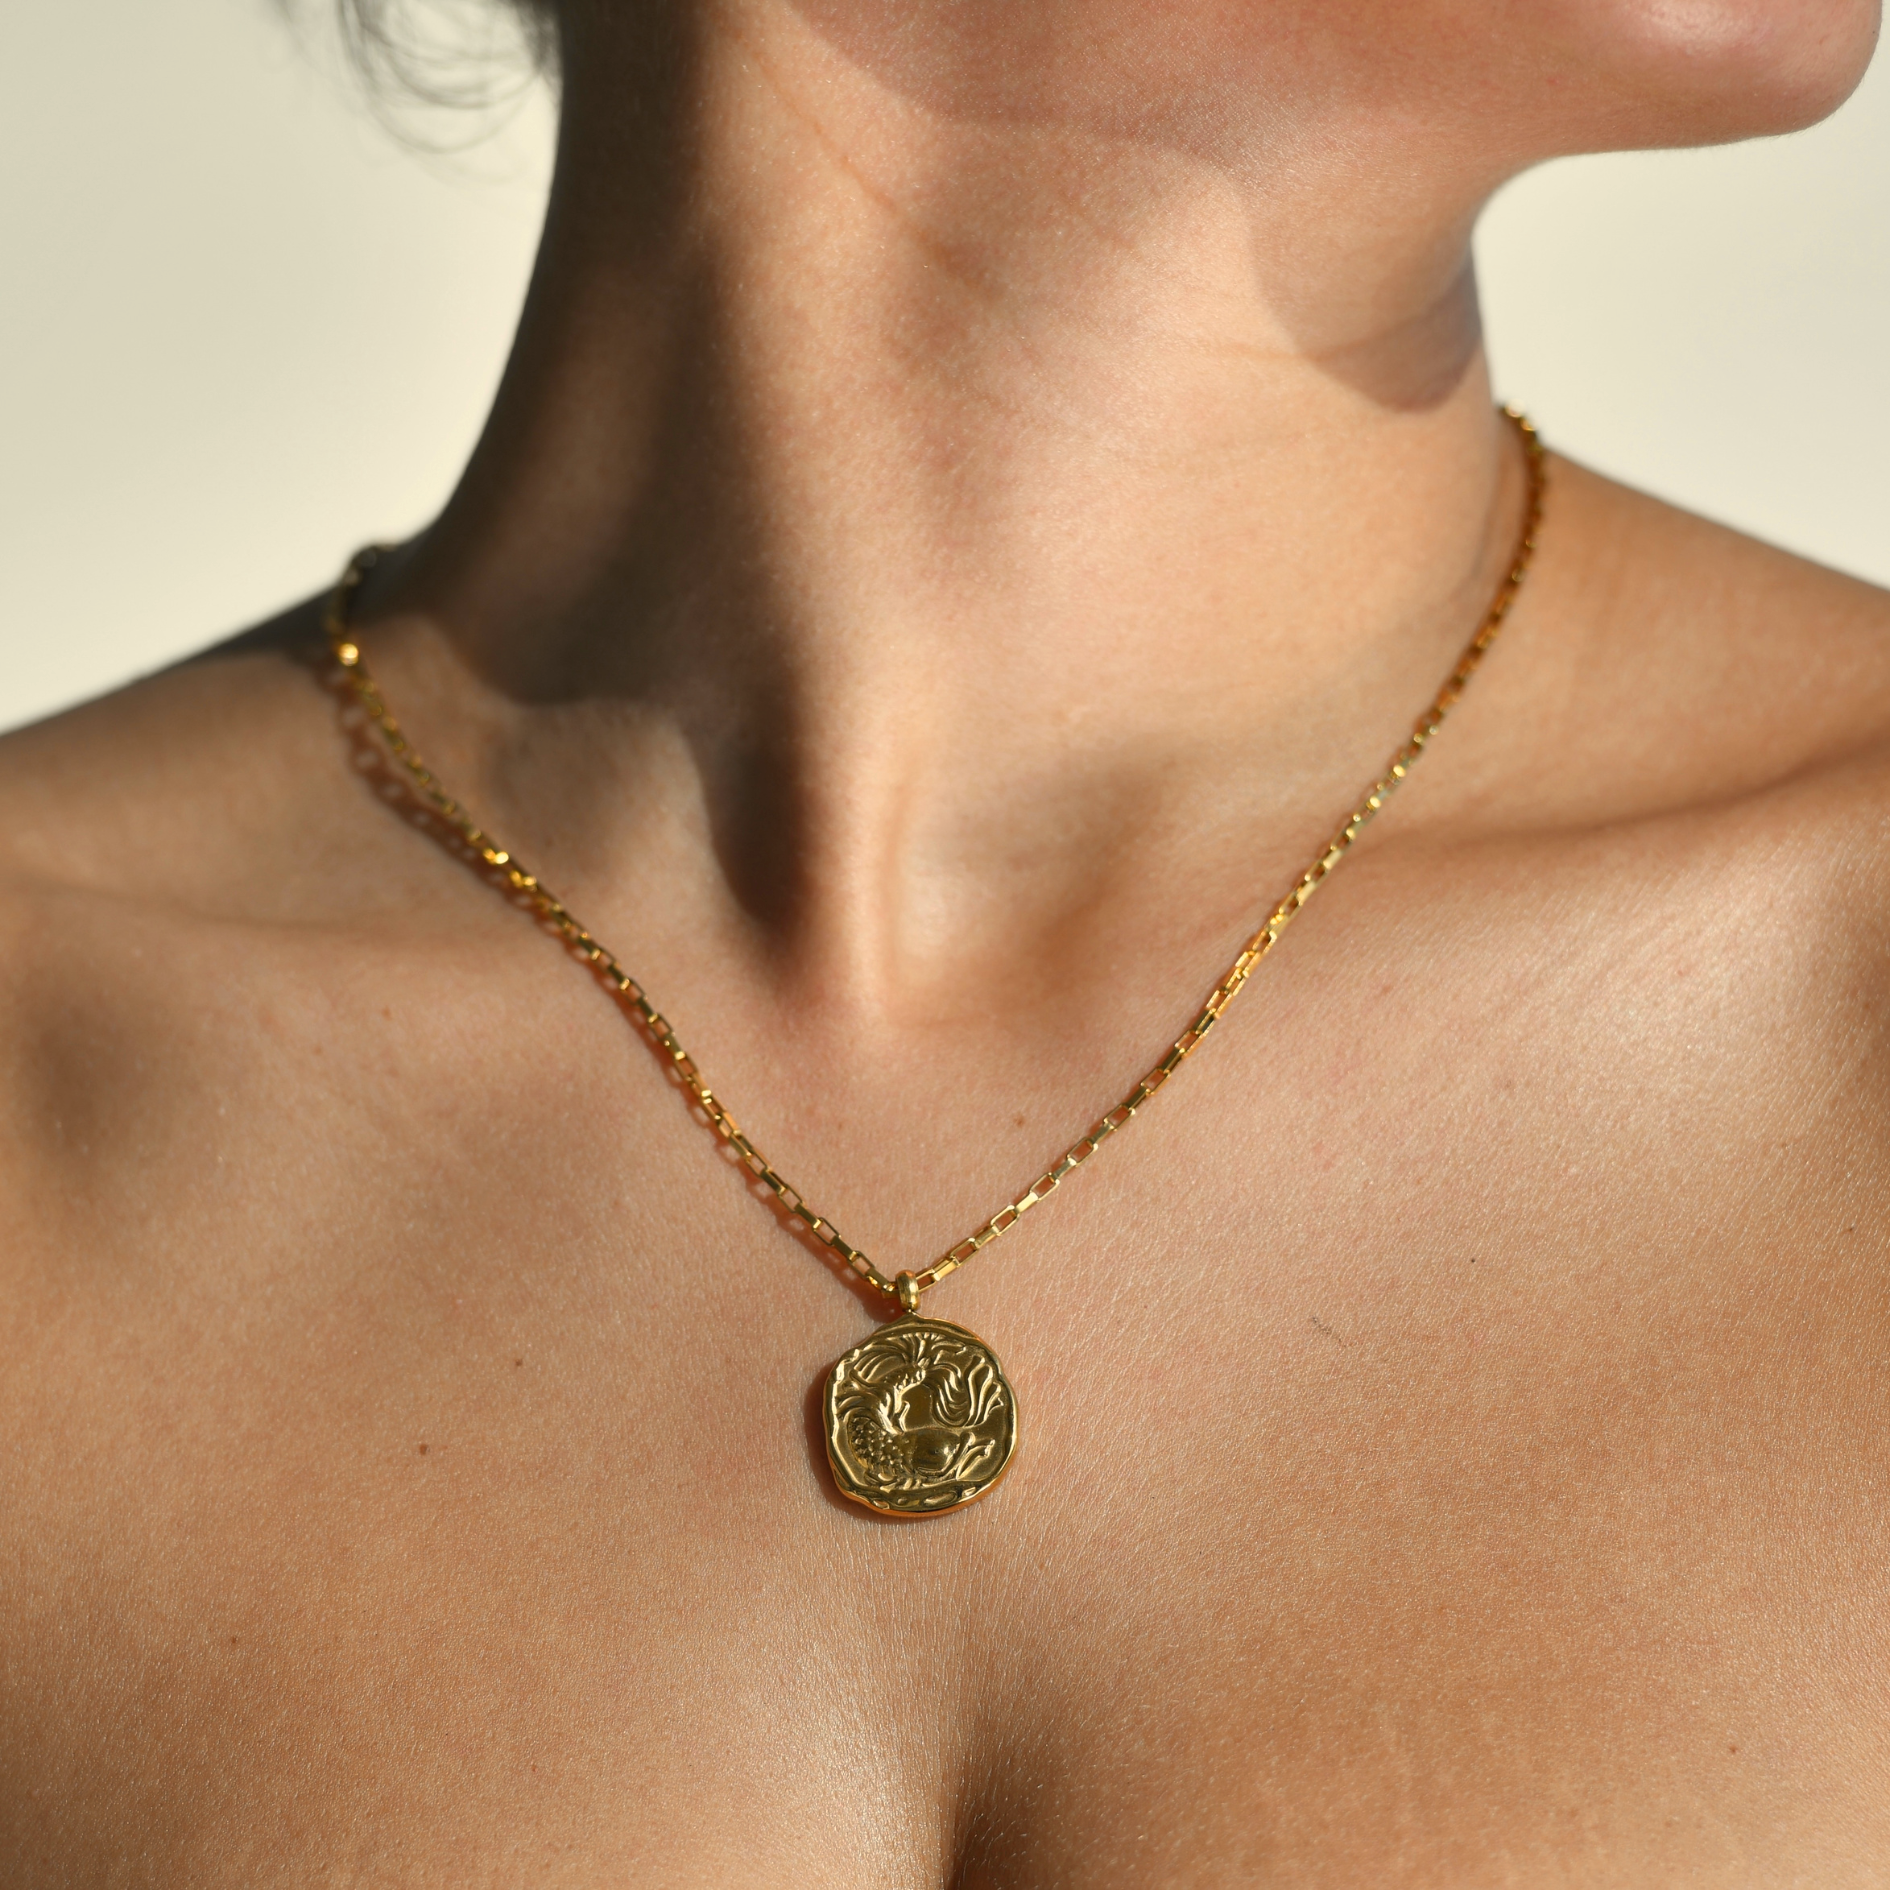 irreguar shape round medallion with a khoi fish in the middle. Gold plated chain and medallion necklace. Pisces medallion gold necklace.